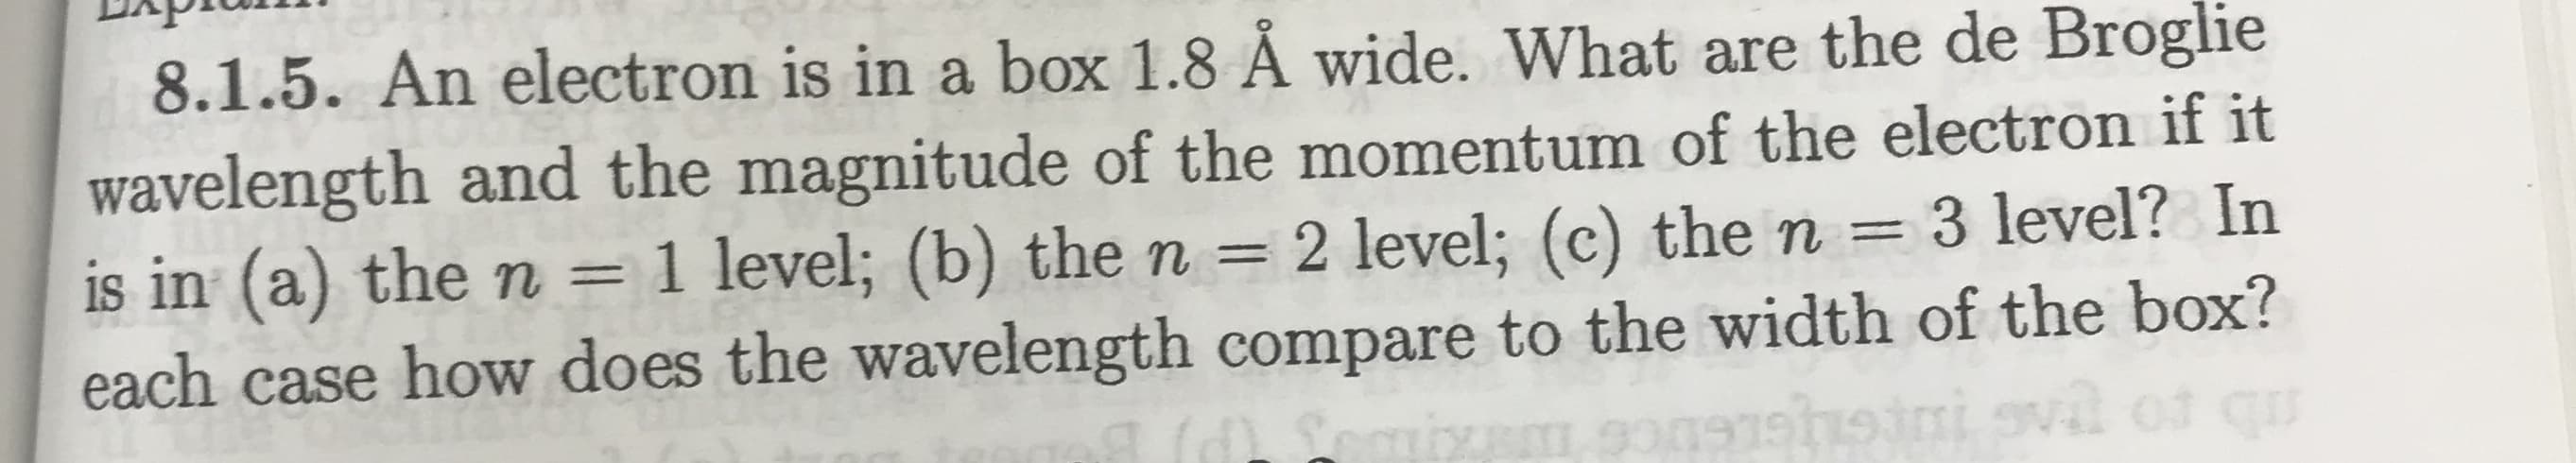 8.1.5. An electron is in a box 1.8 Å wide. What are the de Broglie
wavelength and the magnitude of the momentum of the electron if it
3 level? In
is in (a) the n = 1 level; (b) the n = 2 level; (c) the n
each case how does the wavelength compare to the width of the box?
gvil of qu
